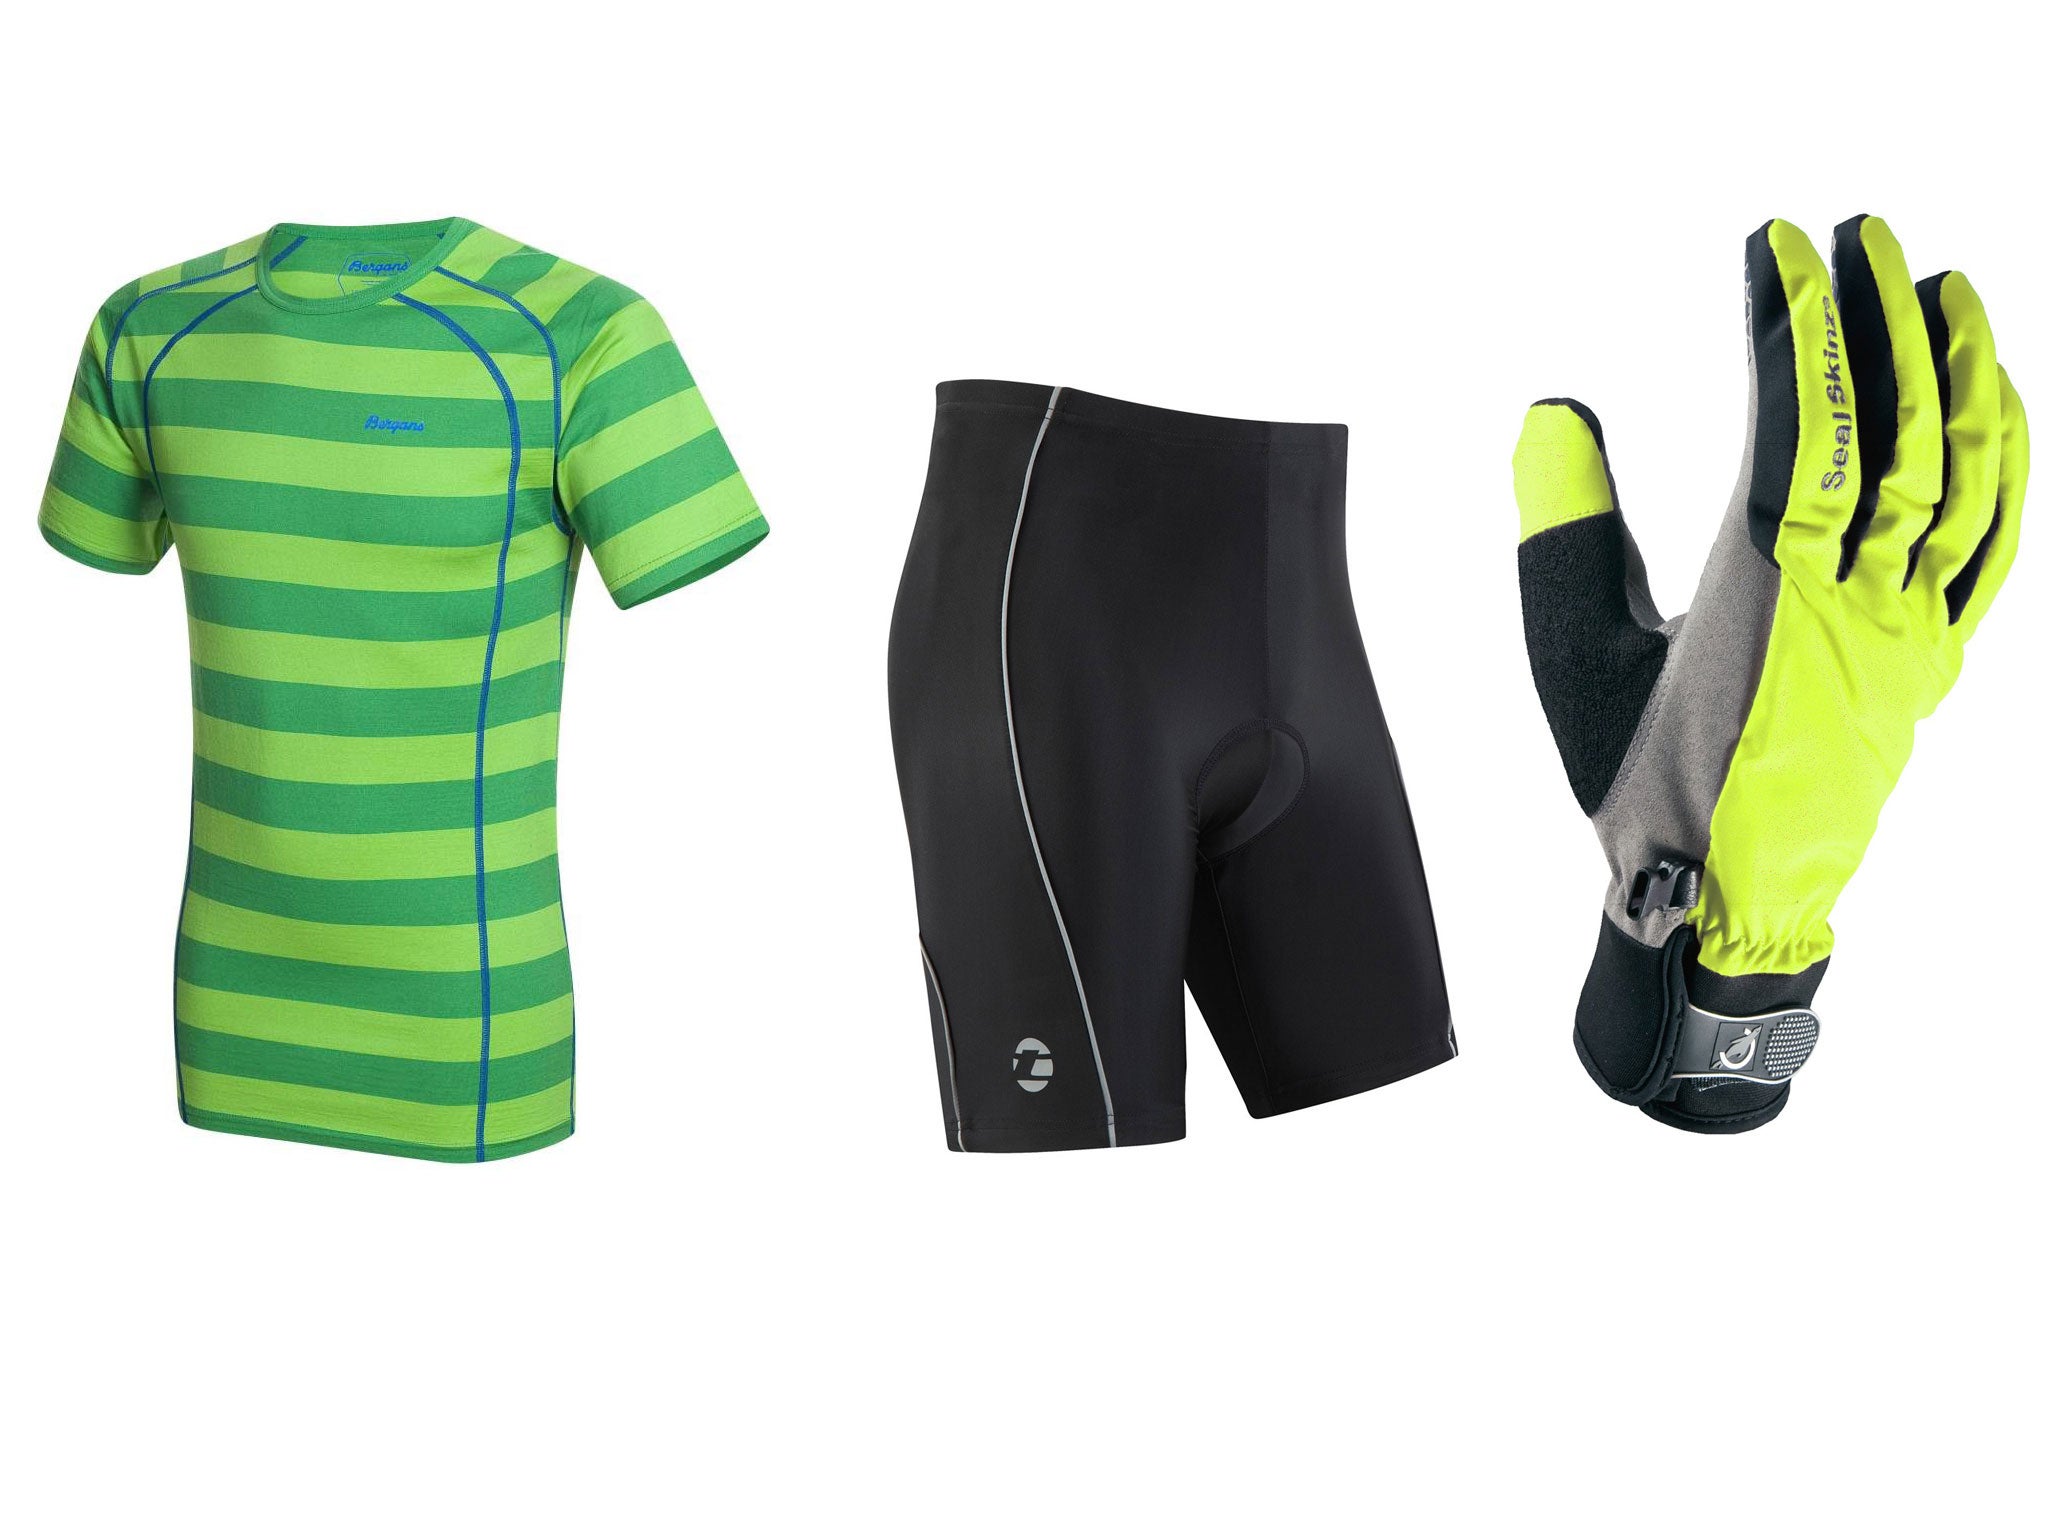 Tour de France 2014: 10 best cycling clothes | The Independent | The ...